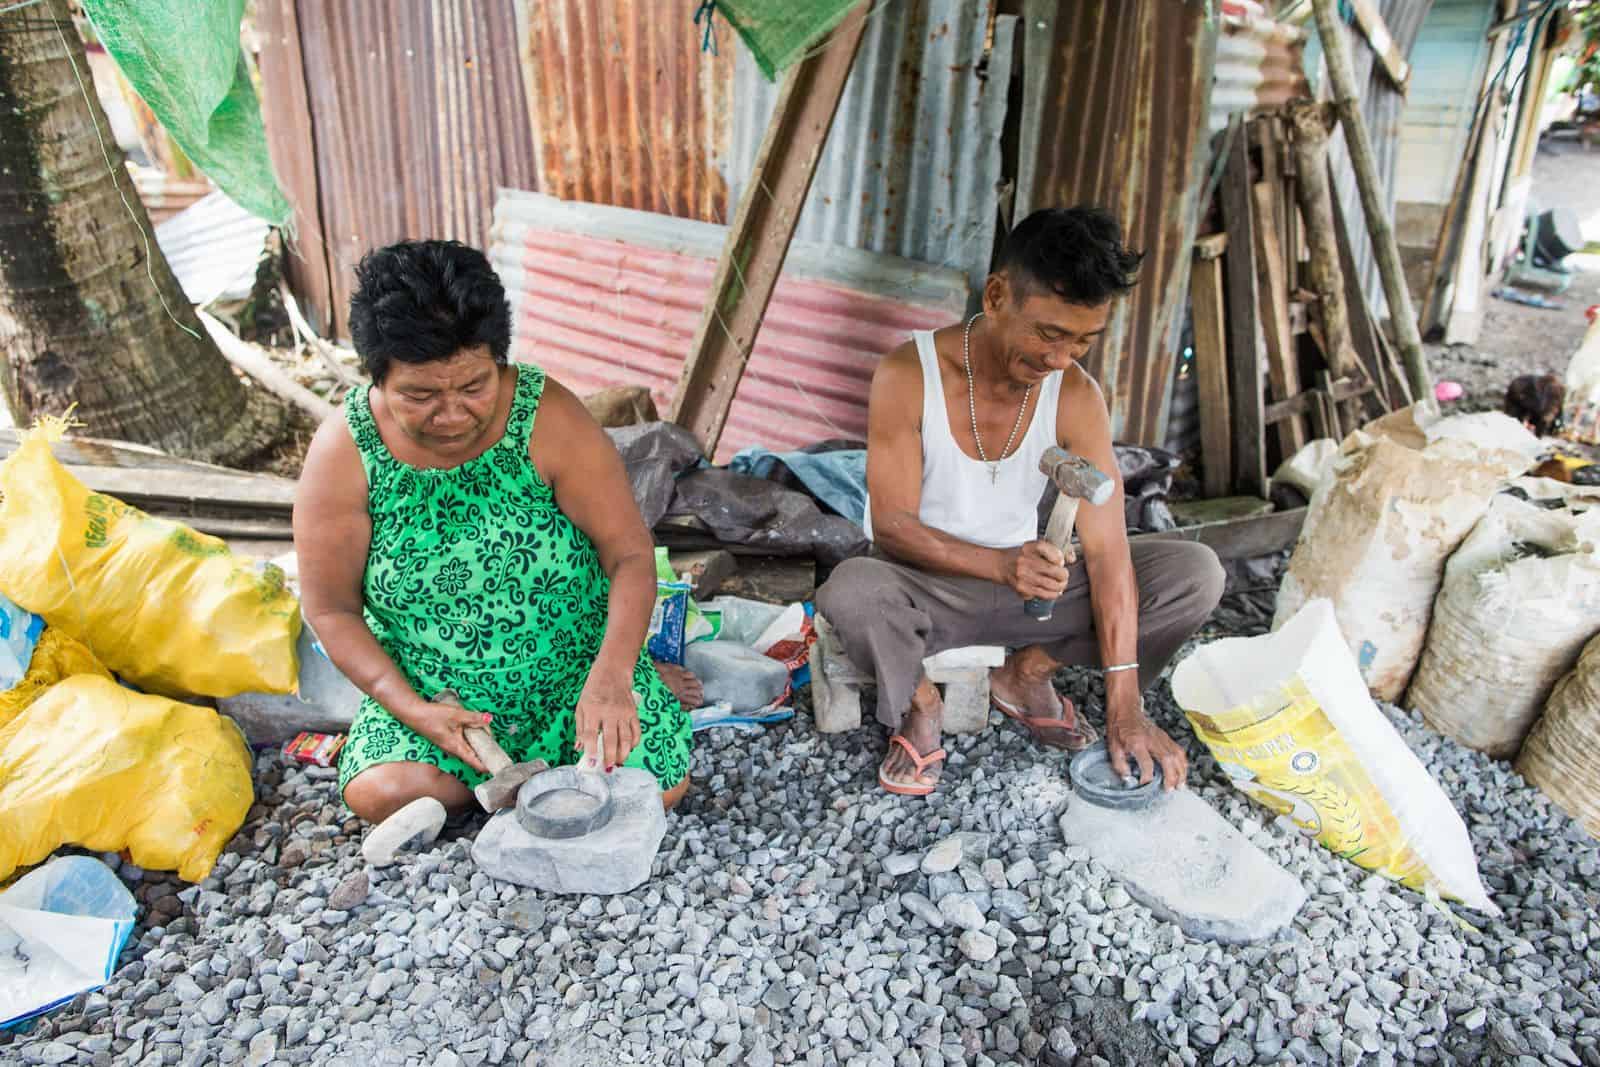 A man and woman crouch on the ground breaking rocks with small hammers. 